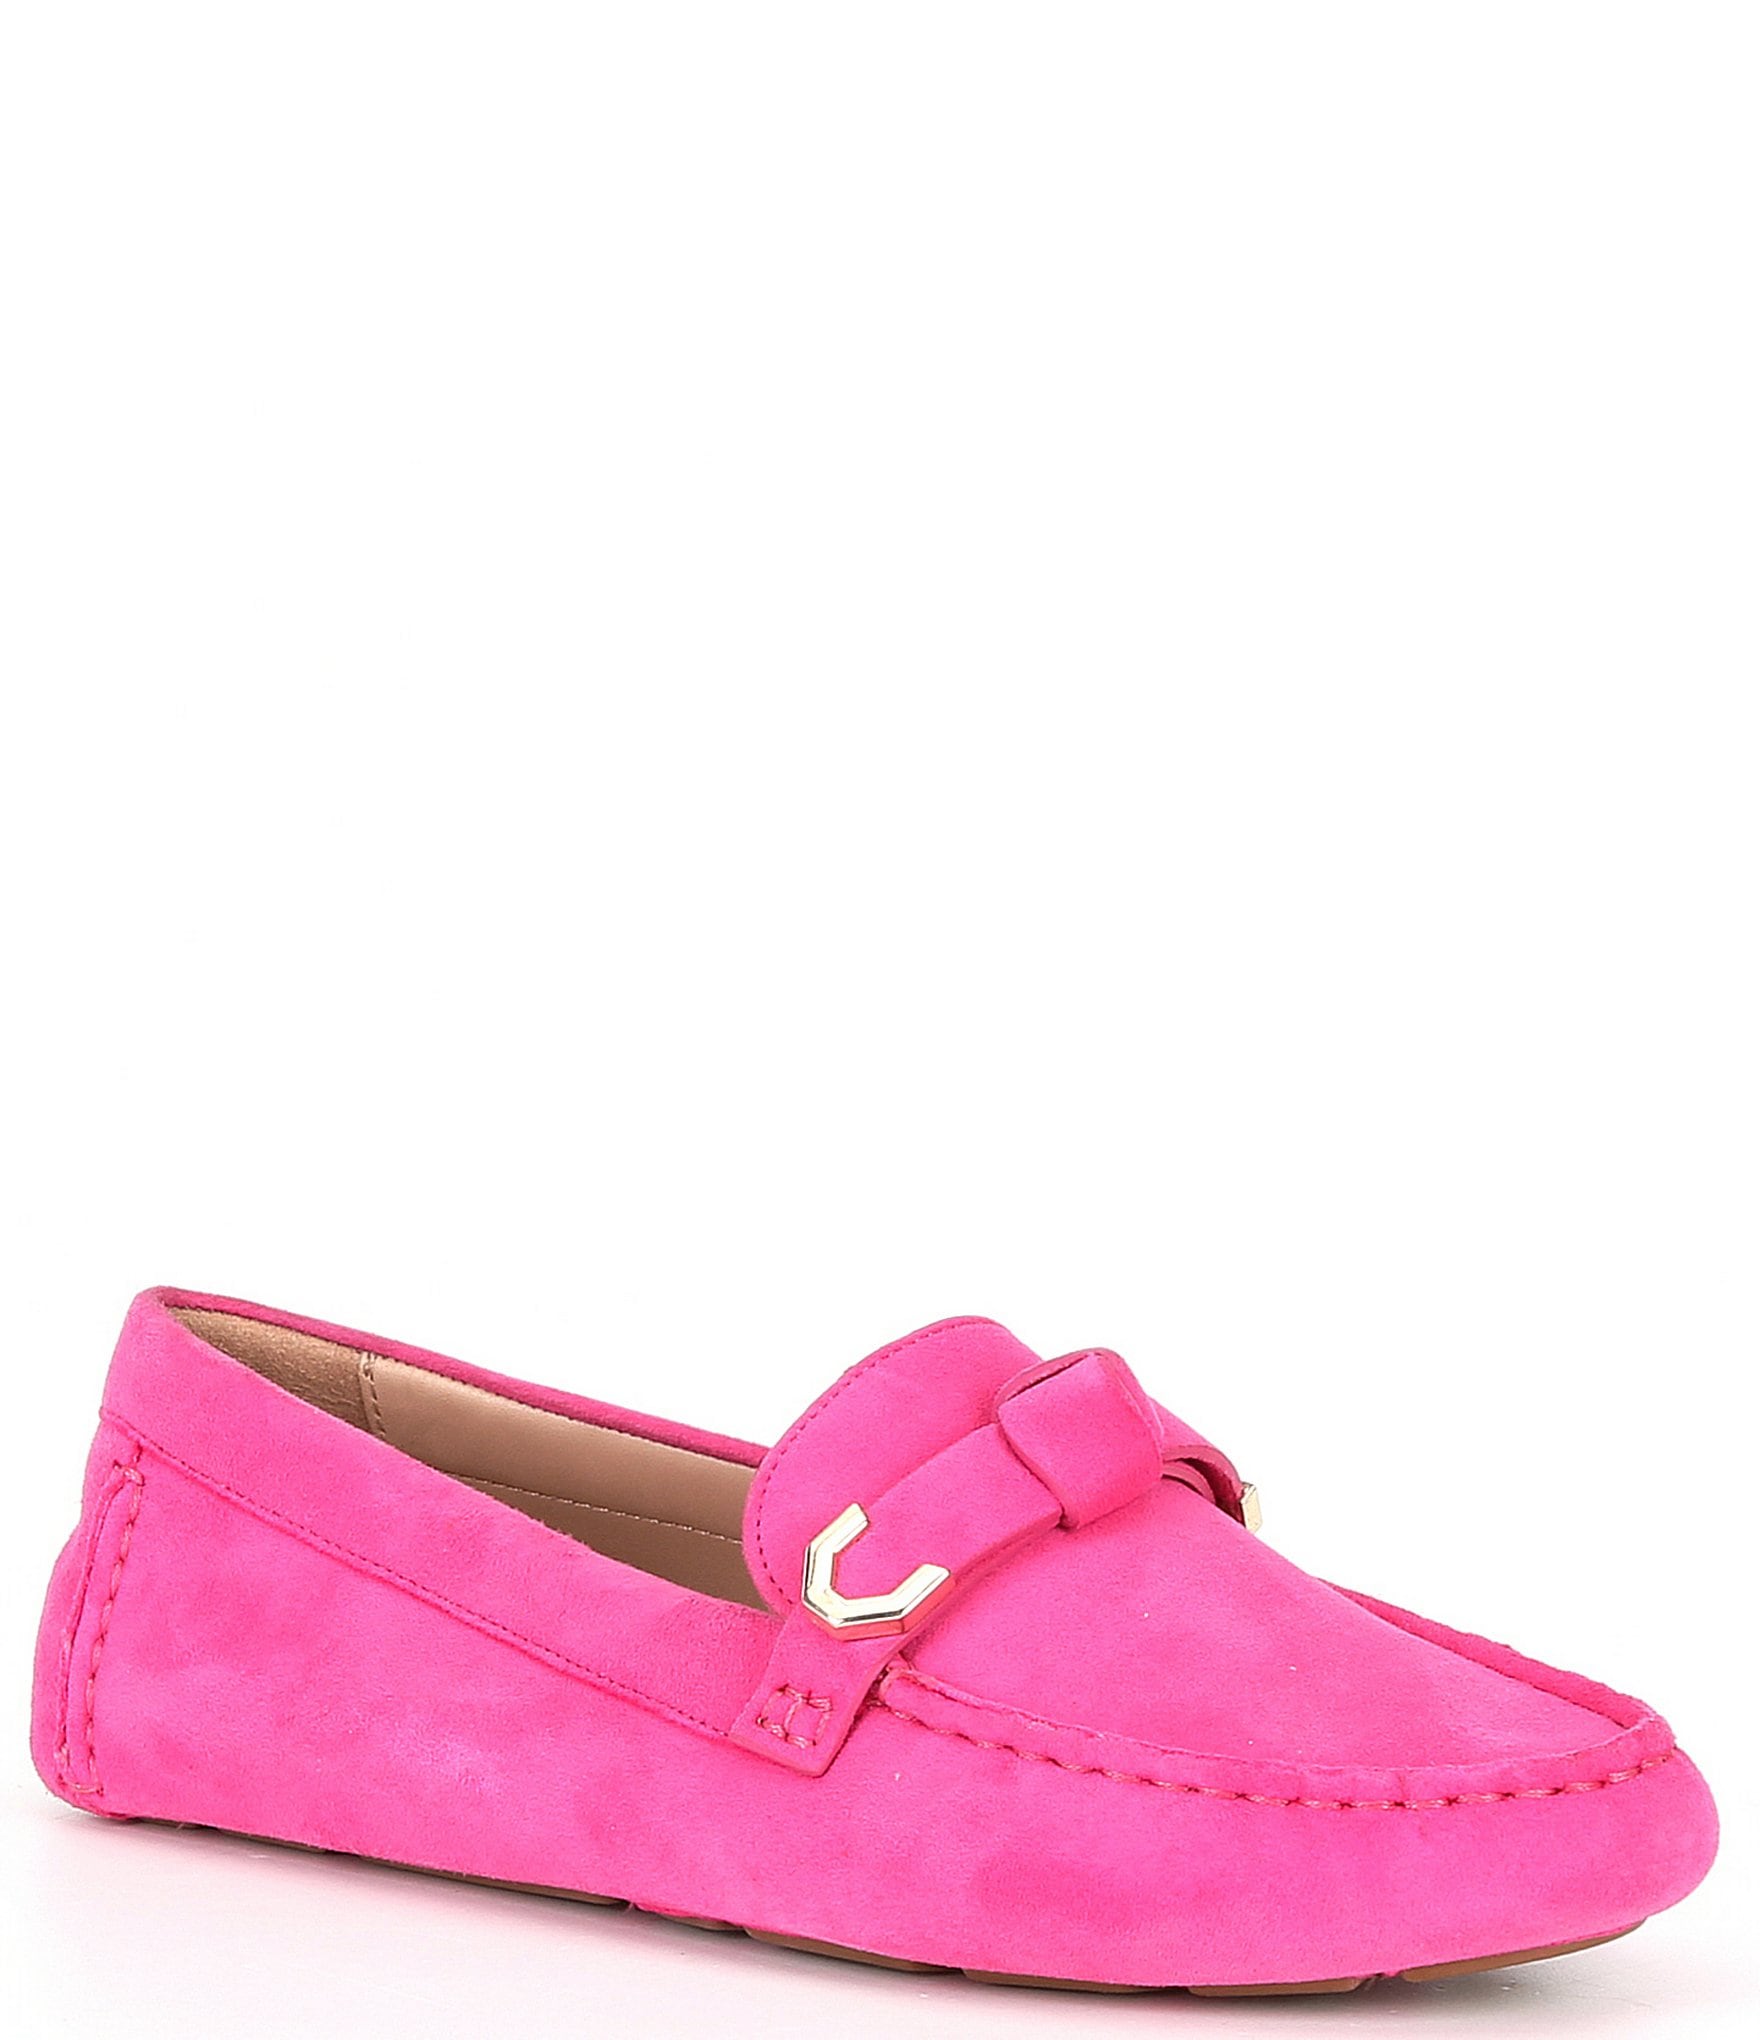 Cole Haan Women's Evelyn Bow Suede Drivers | Dillard's